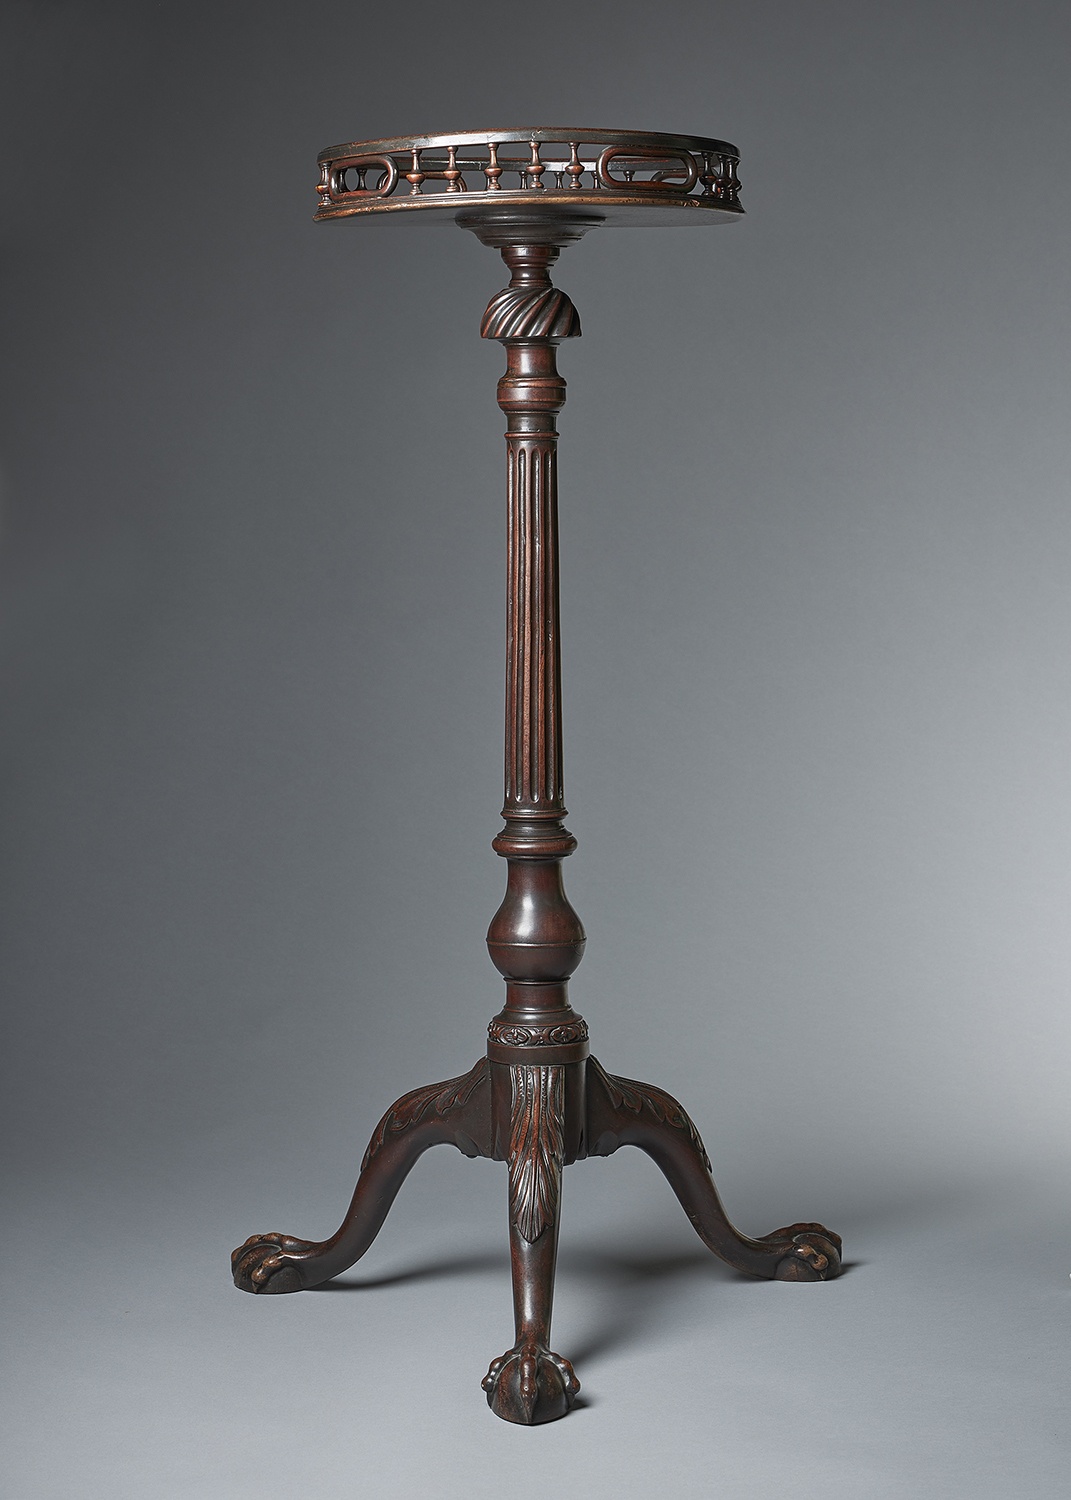 A Fine George II 18Th Century Chippendale Period Carved Mahogany Torchiere. Circa 1755-1765, England 3